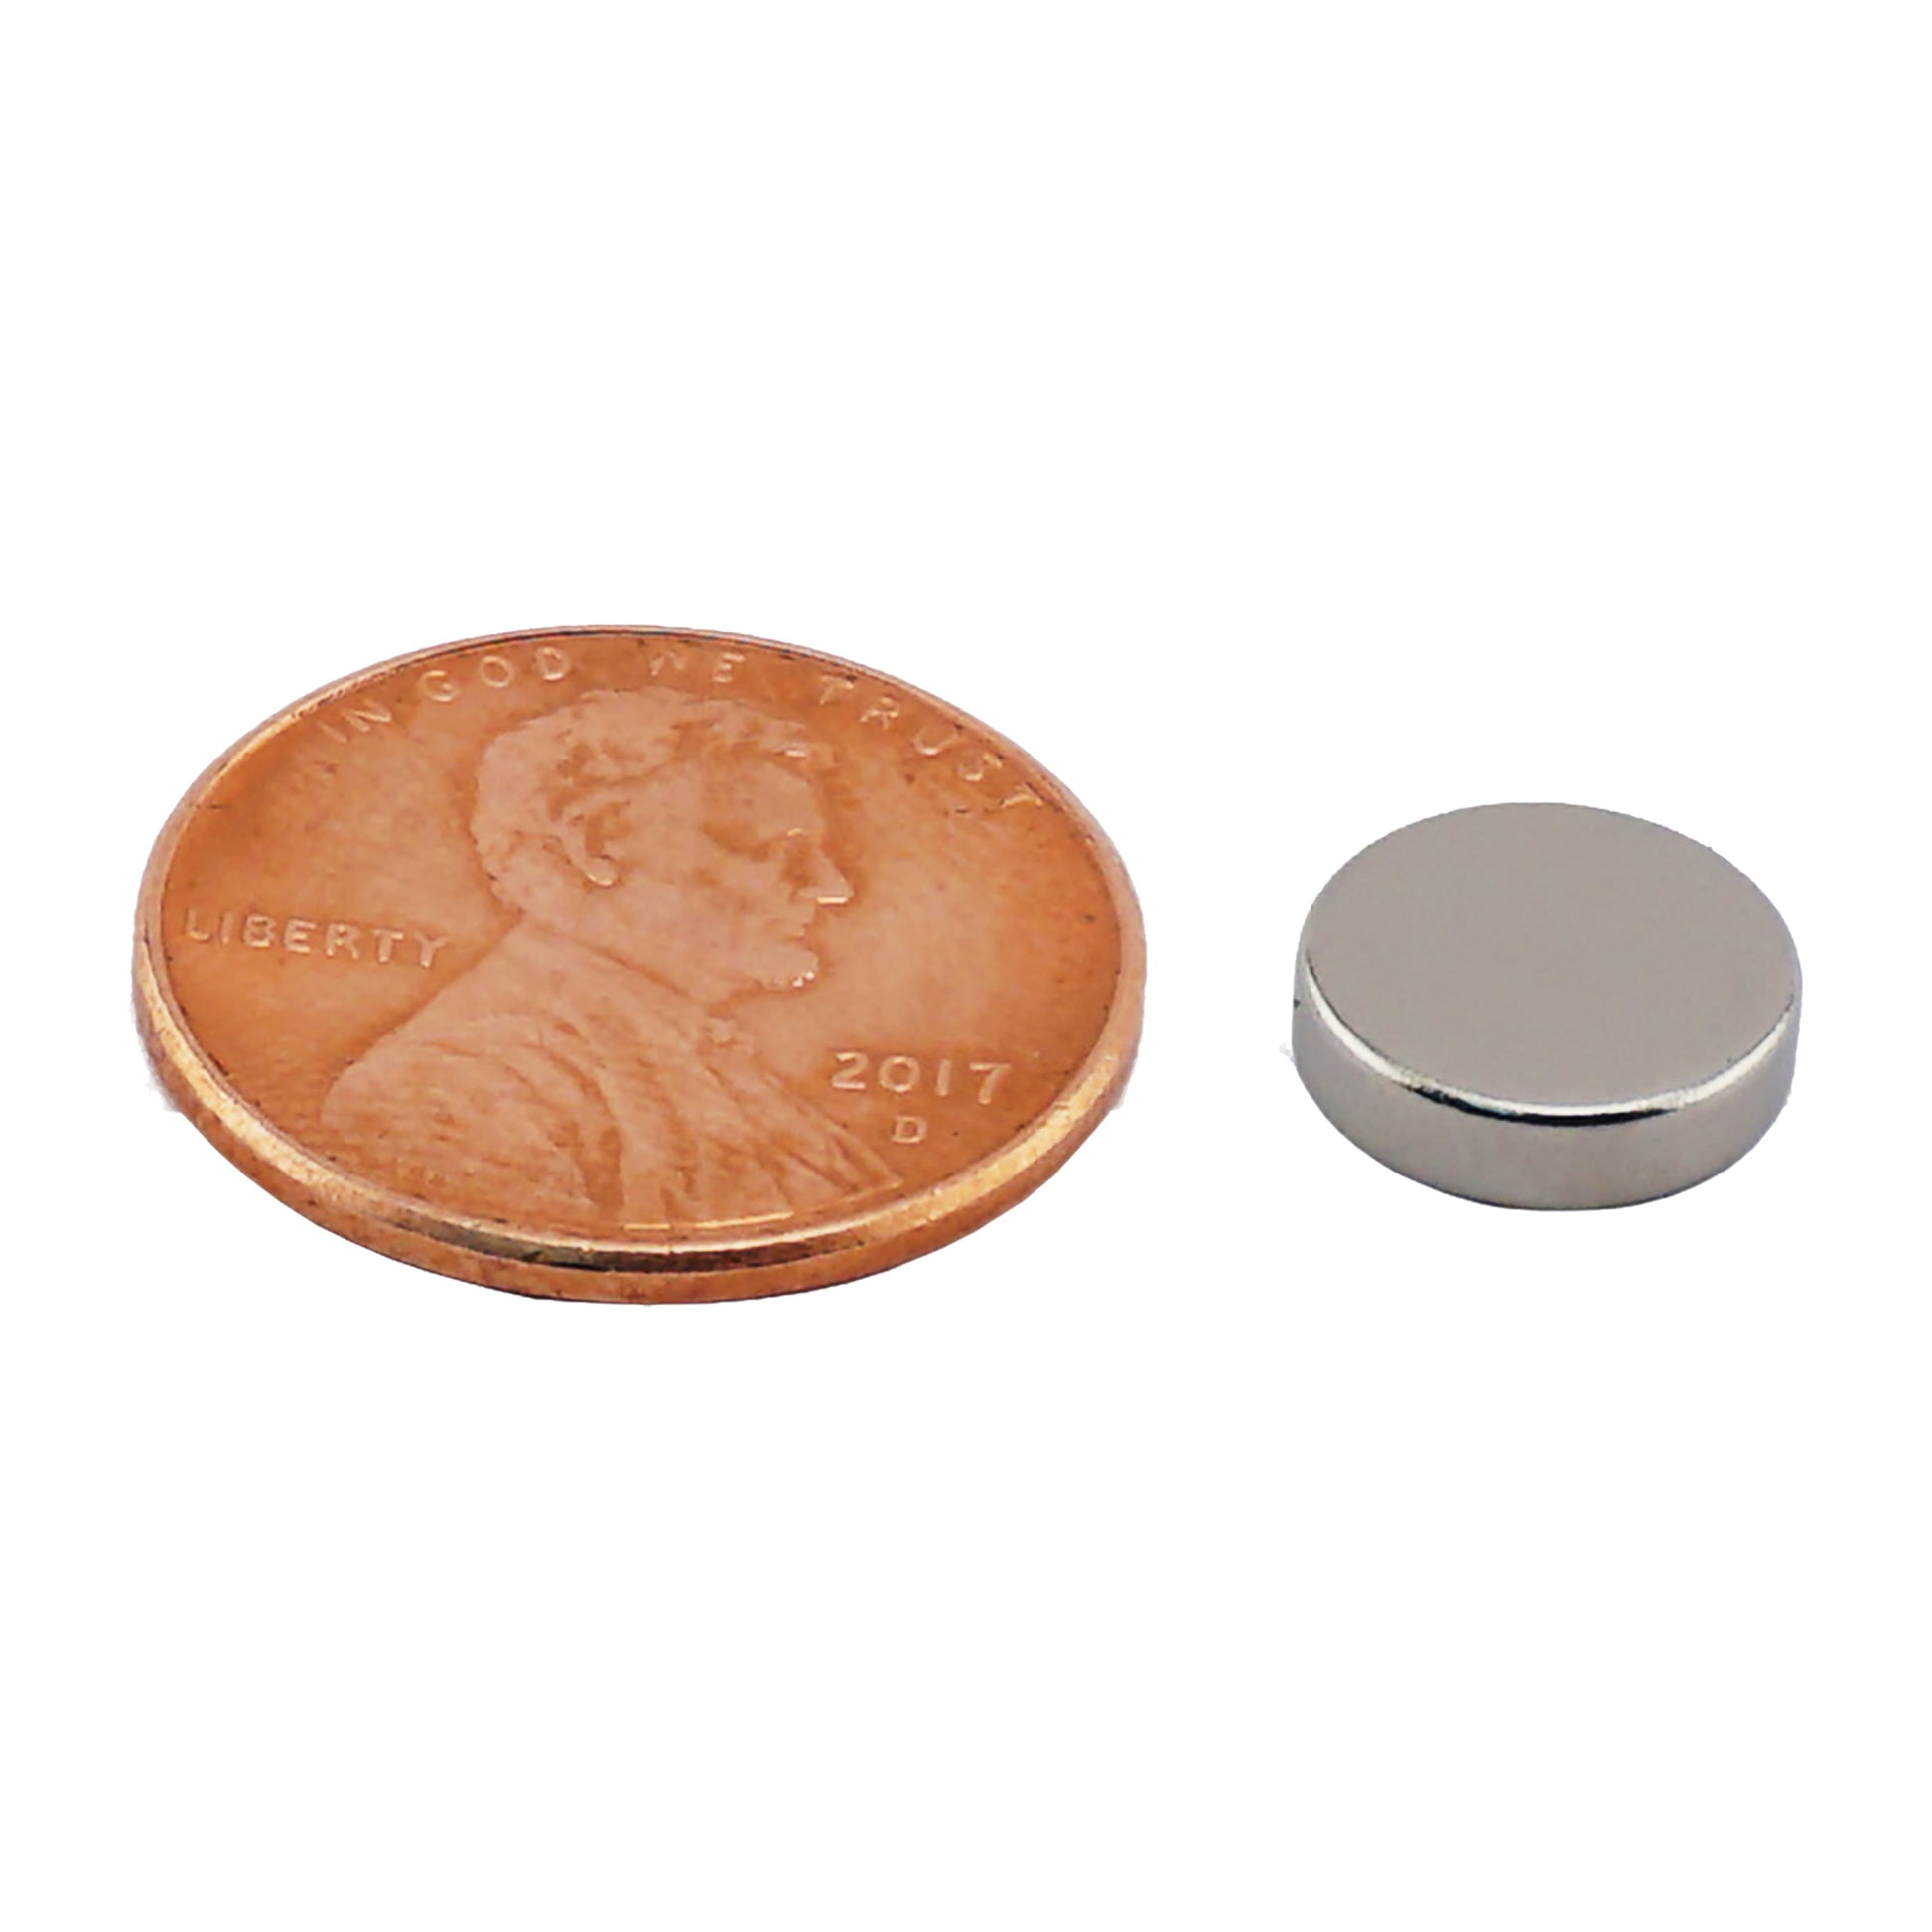 Load image into Gallery viewer, ND060N-35 Neodymium Disc Magnet - Compared to Penny for Size Reference